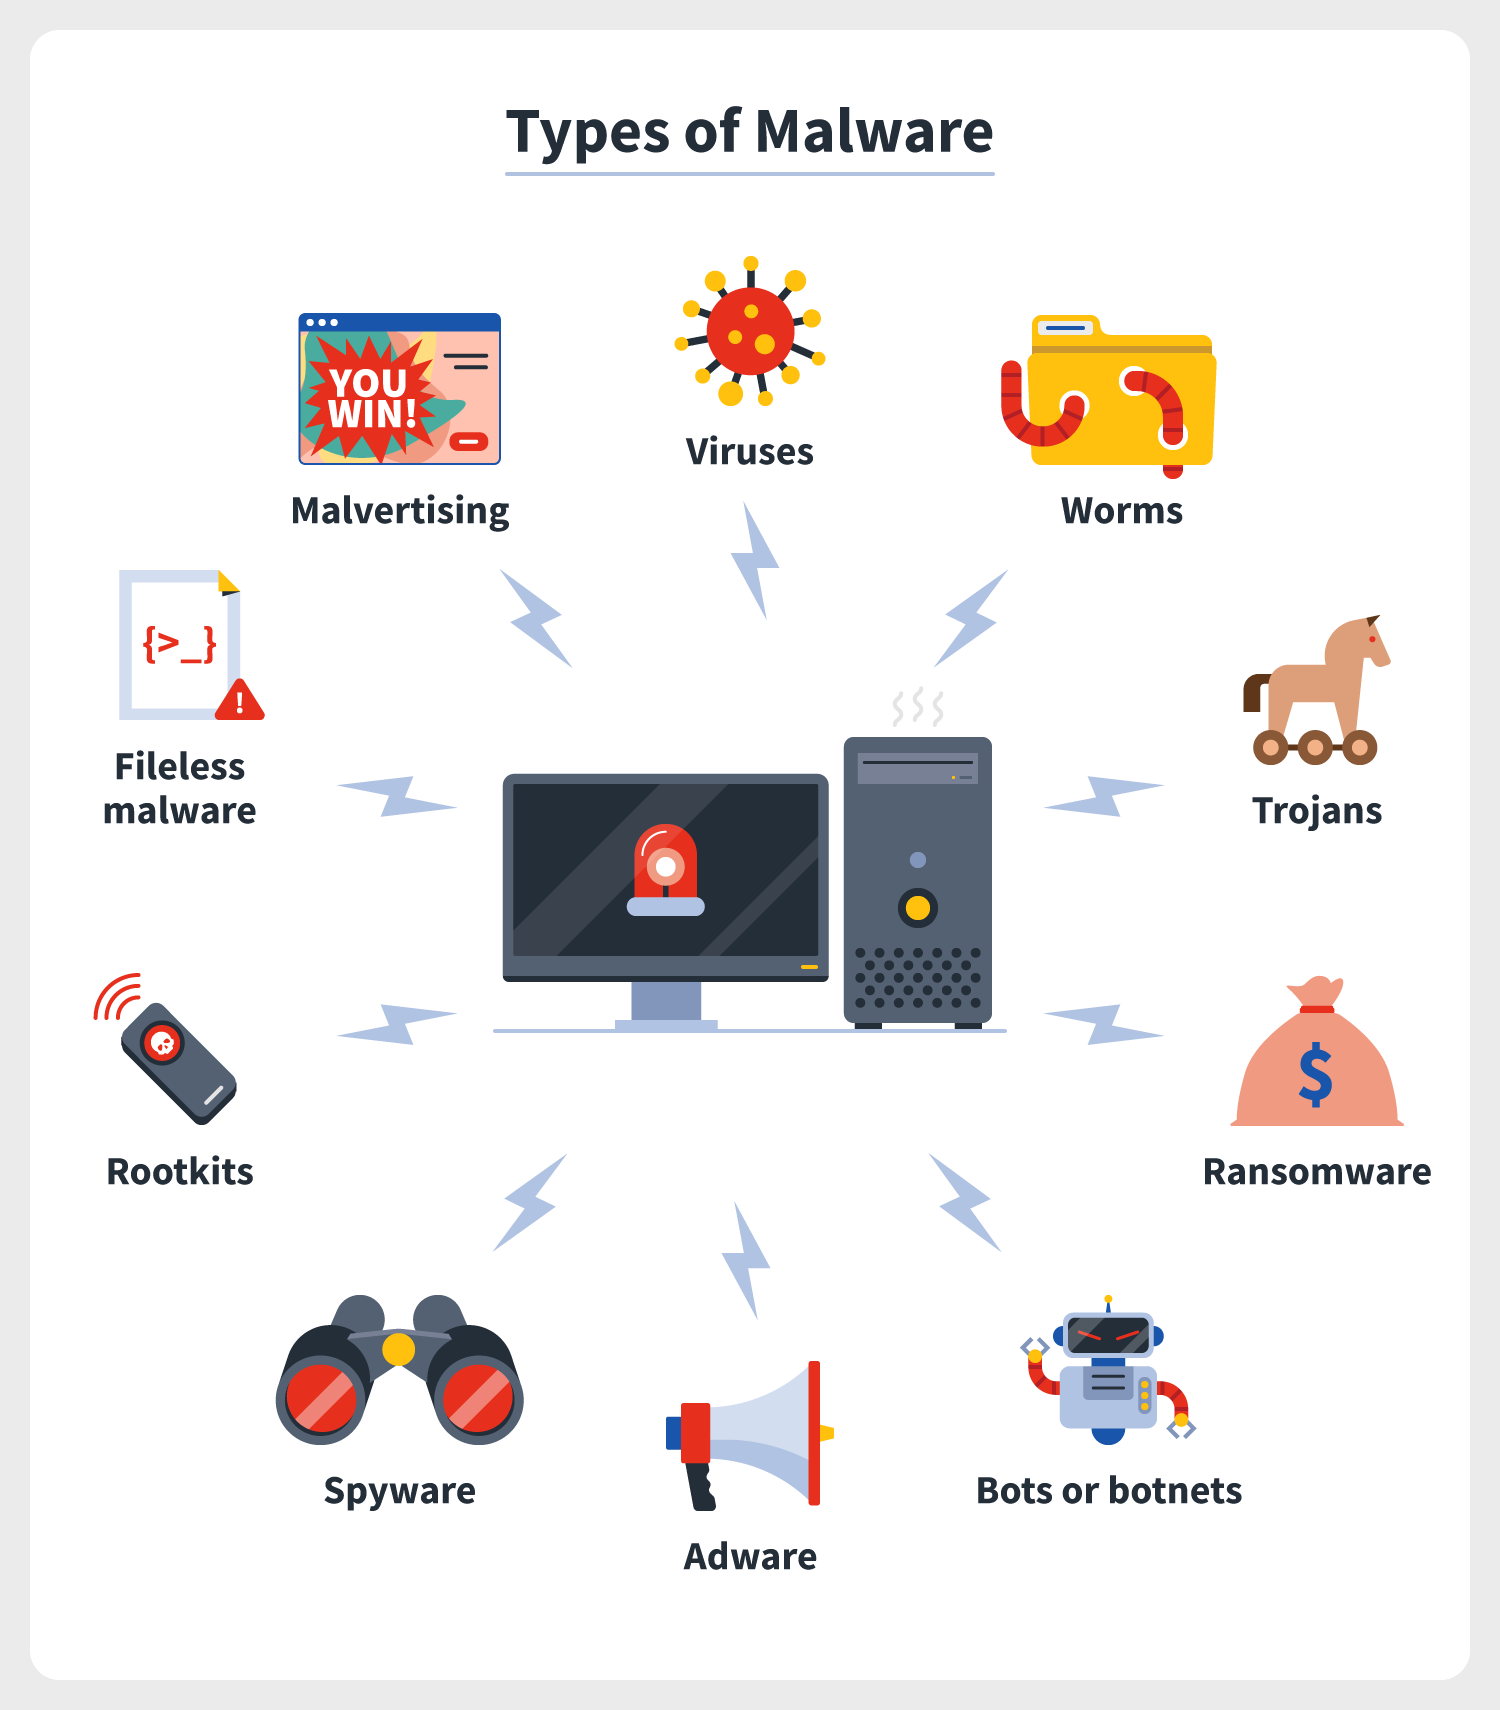 Malware: Definition and types
Common signs of a malware infection